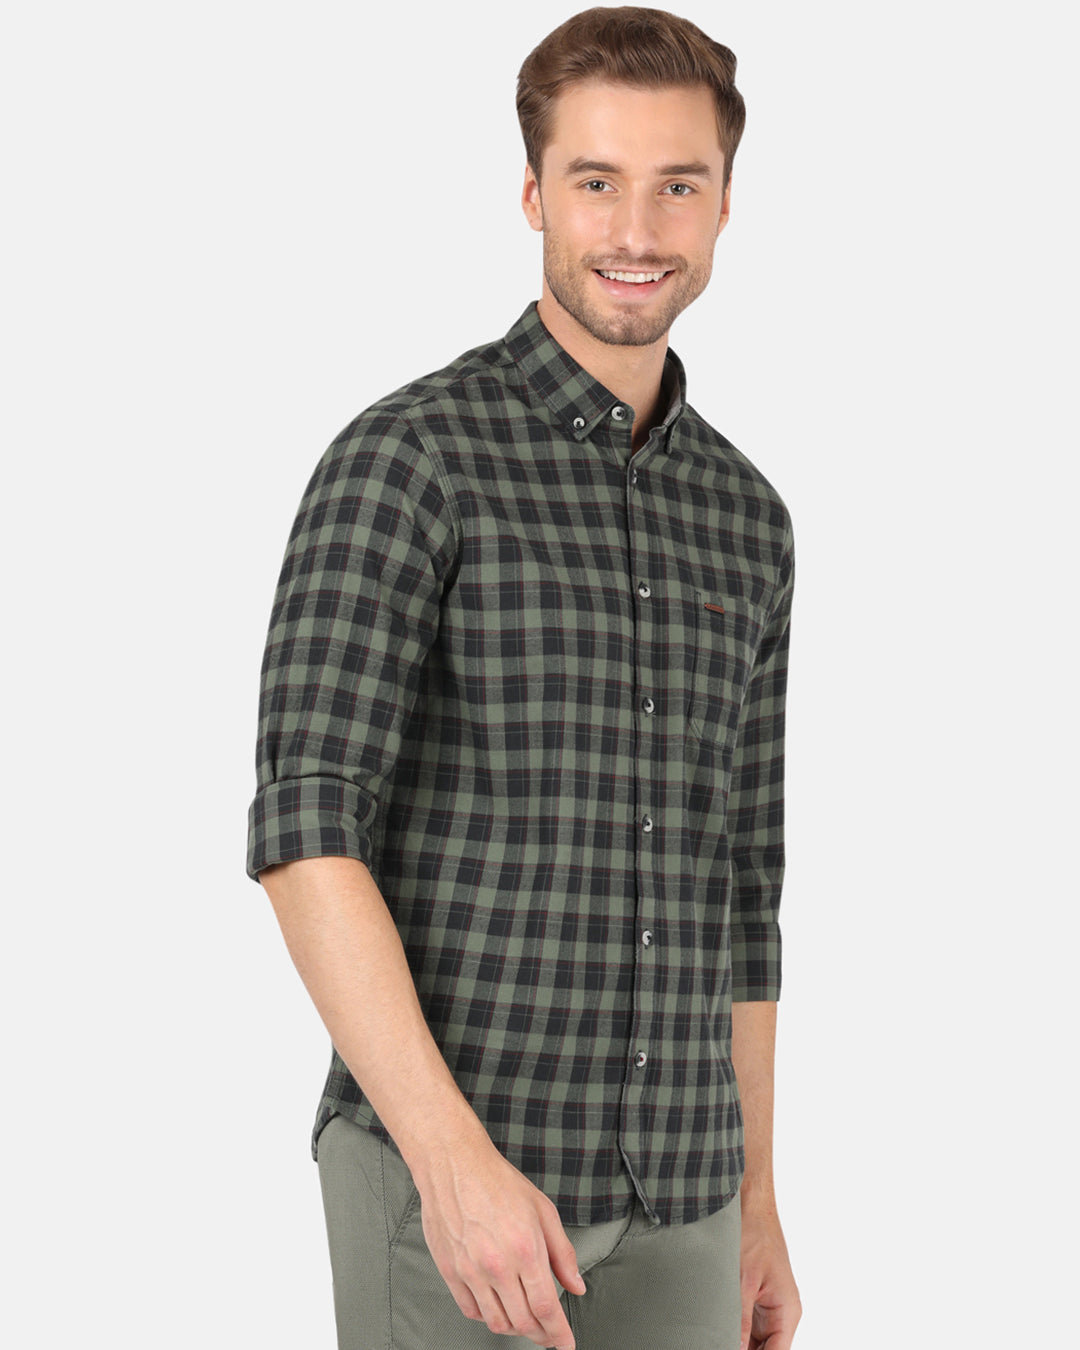 Crocodile Men's Casual Full Sleeve Comfort Fit Checks Green with Collar Shirt